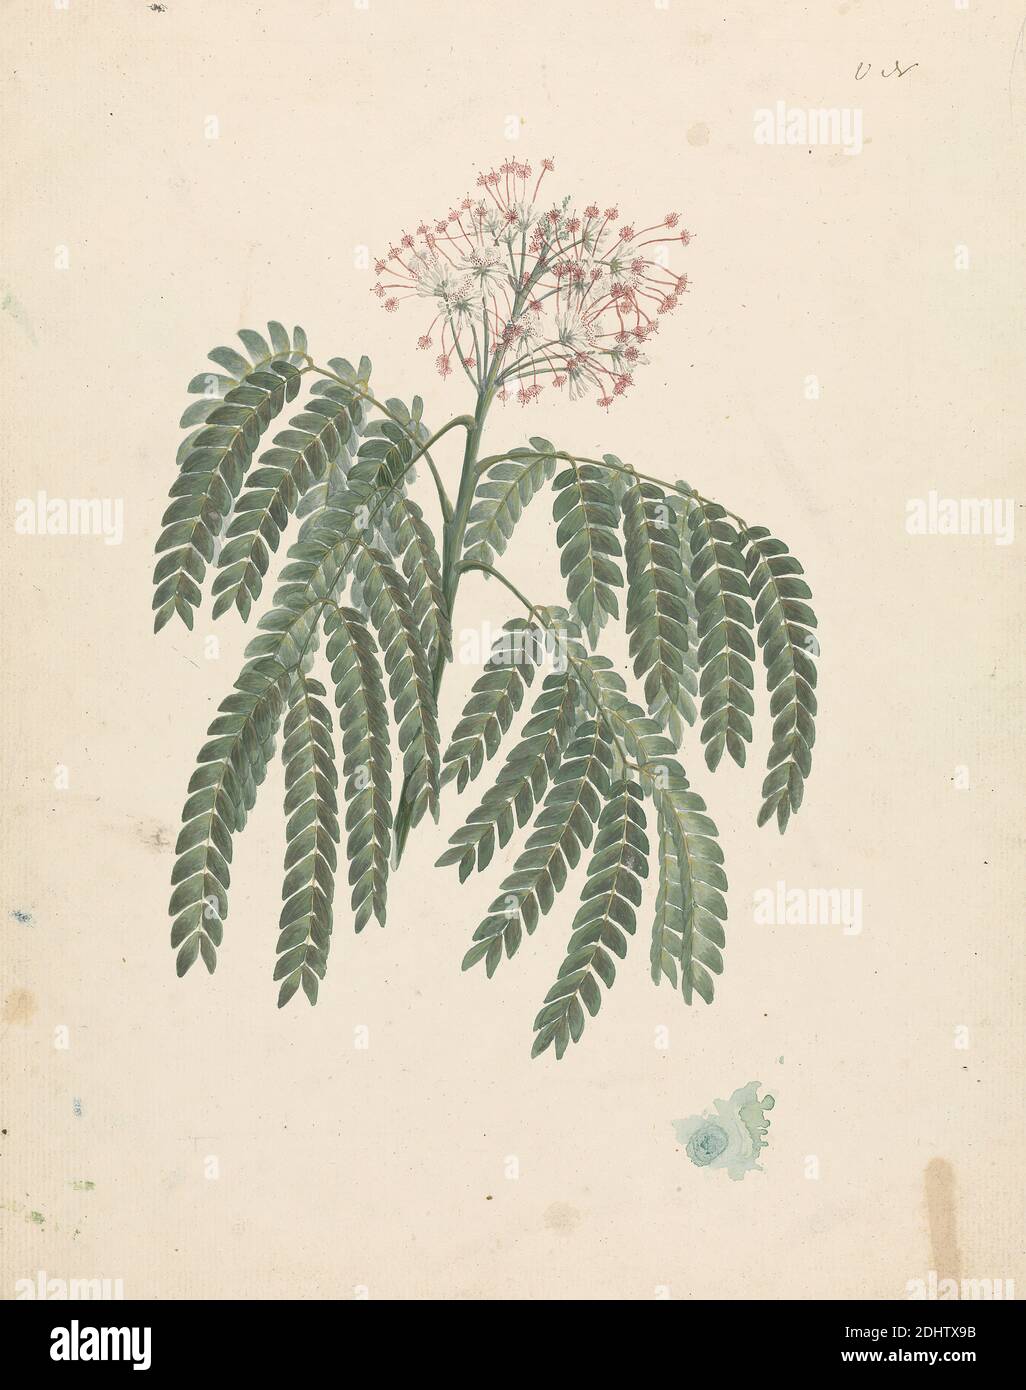 Albizia gummifera (J.F. Gmel.) C.A. Sm. (Gummy Albizia Tree): finished drawing of flowering head of shoot, with details of inflorescence, florets, and leaf, Luigi Balugani, 1737–1770, Italian, Formerly James Bruce, 1730–1794, British, ca. 1768, Watercolor, gouache, and graphite on medium, slightly textured, cream laid paper, Sheet: 12 3/8 × 9 3/4 inches (31.4 × 24.8 cm), botanical subject Stock Photo